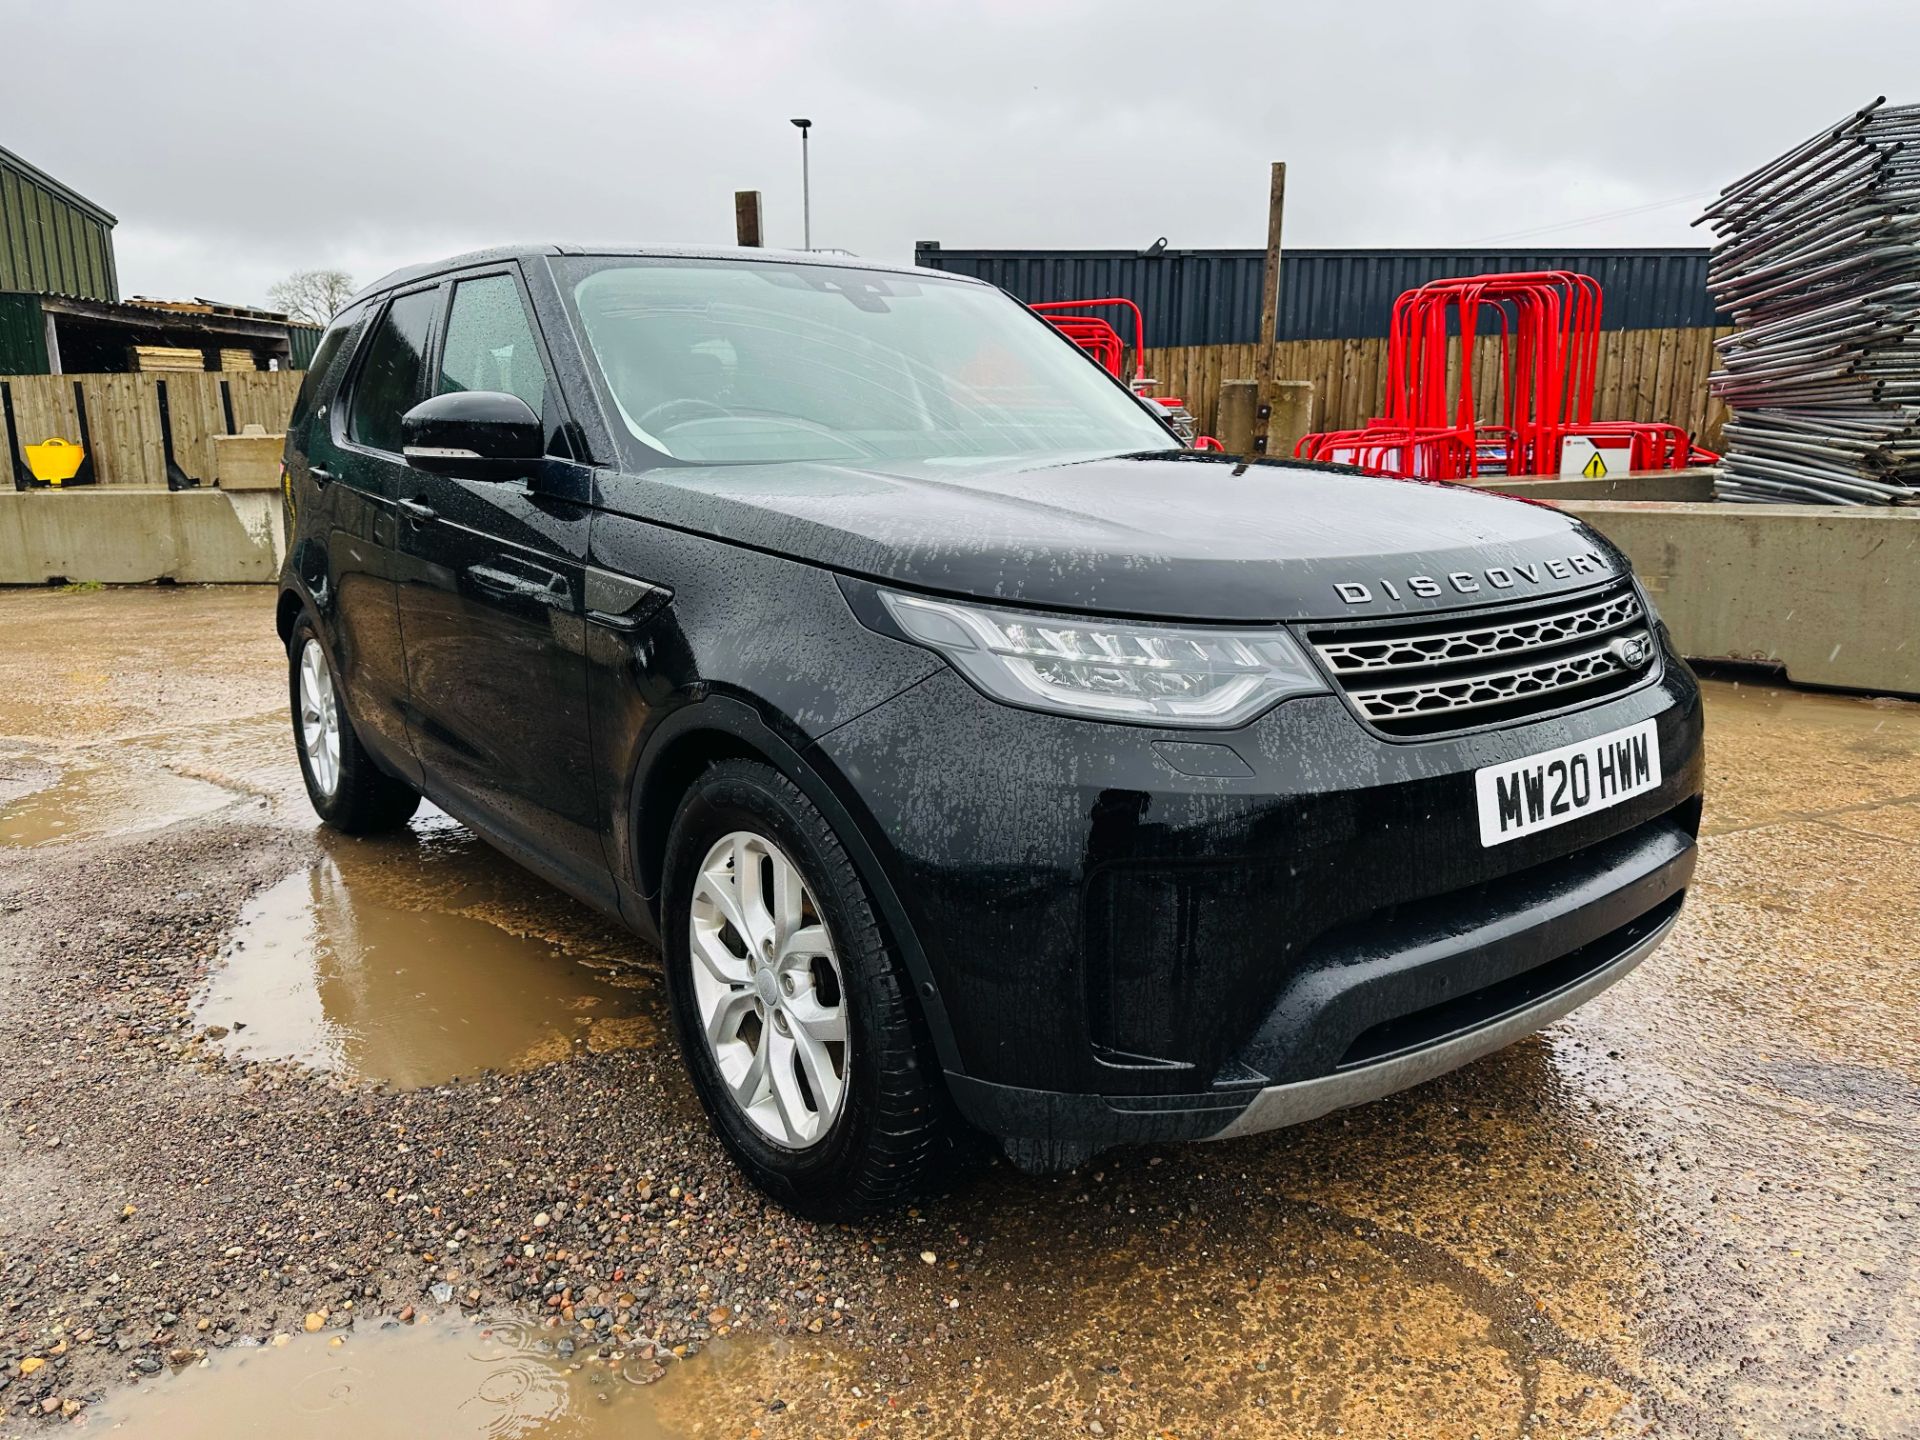 (Reserve Met) Land Rover Discovery SE Automatic (Black Edition) - 2020 Model - Only 57k Miles! - Bild 2 aus 40